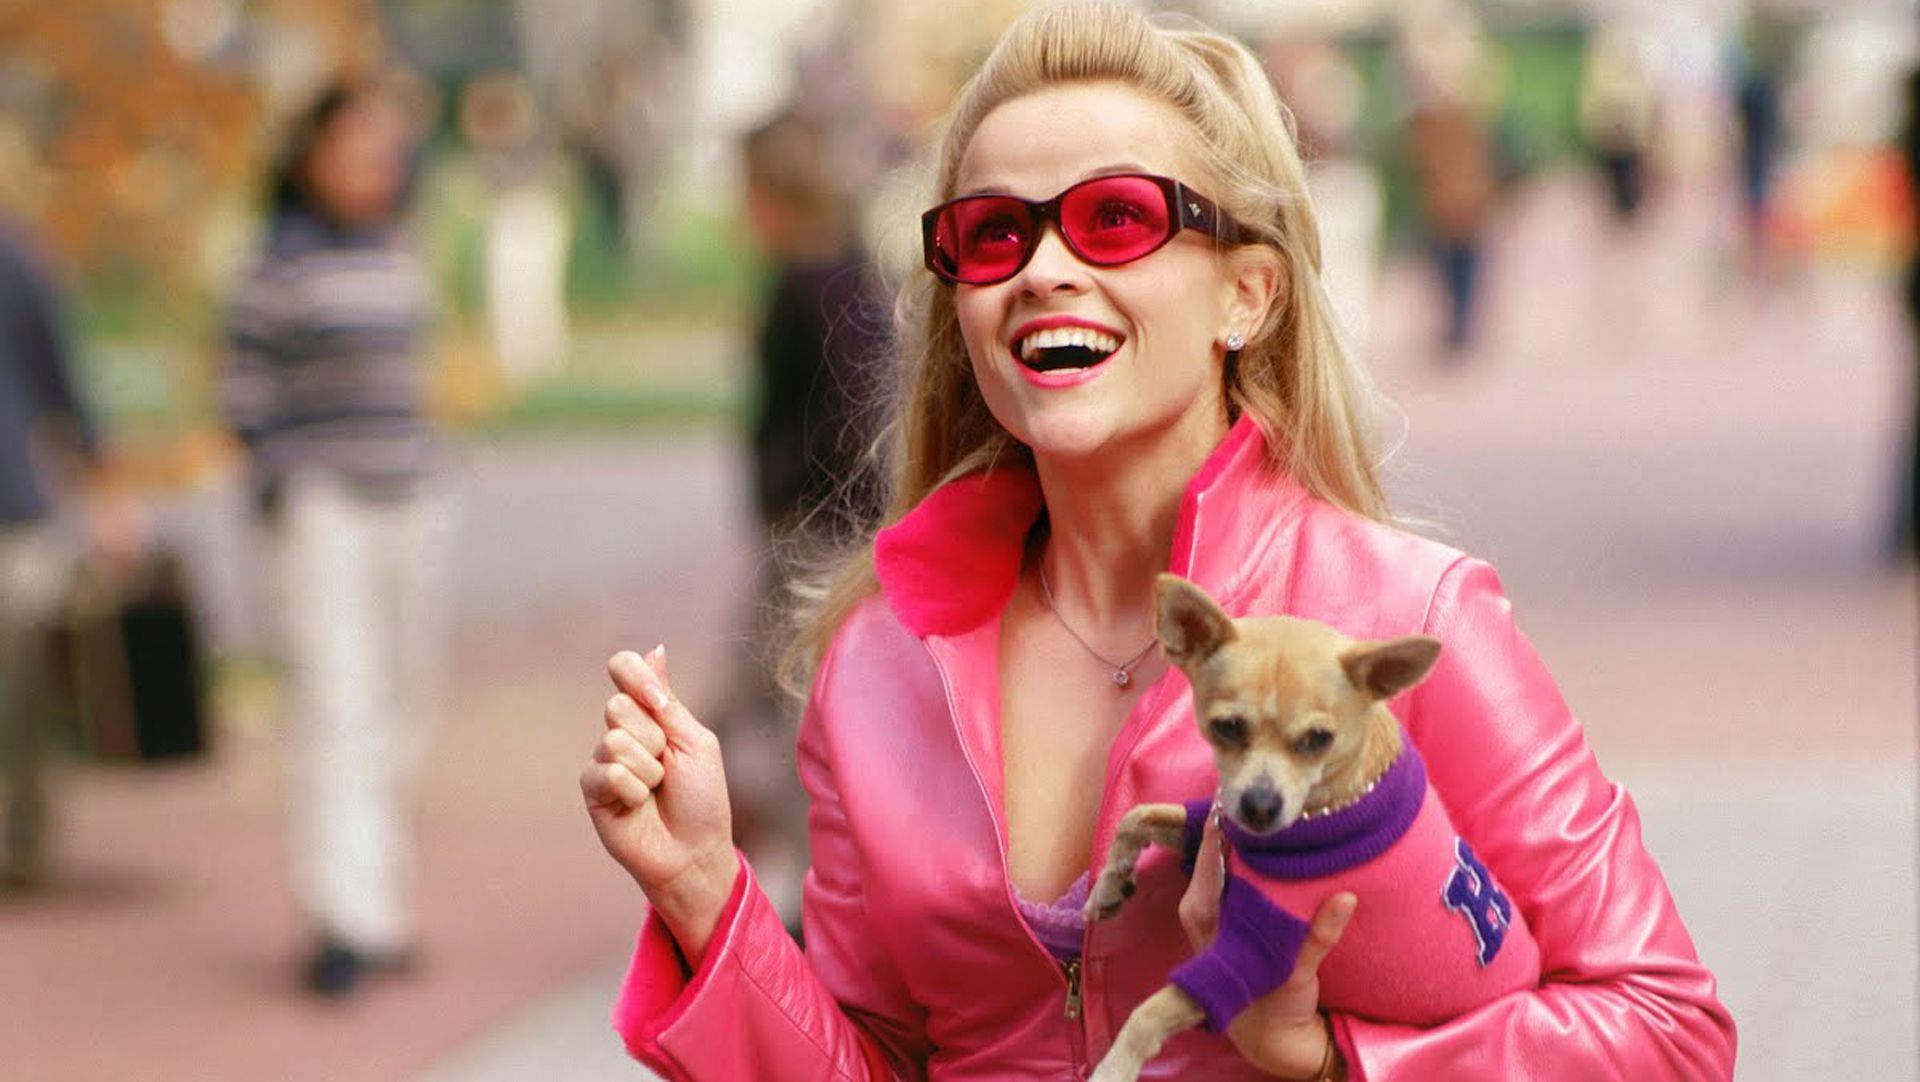 Mindy Kaling And Reese Witherspoon Are Teaming Up For ‘Legally Blonde 3’